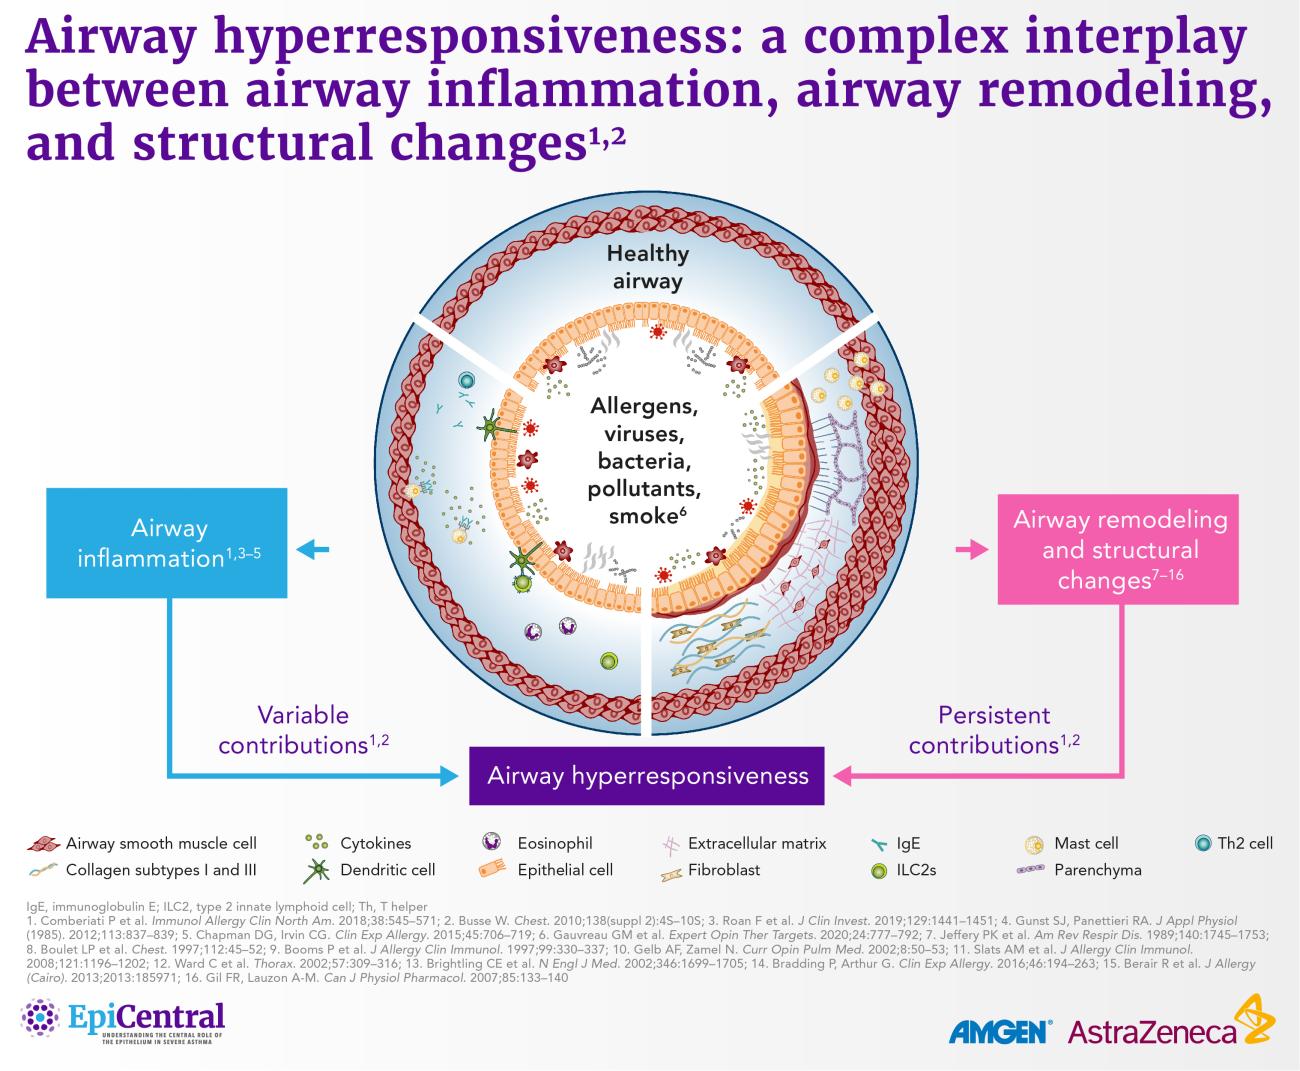 A summary of the complex interplay between airway inflammation, airway remodeling, and structural changes in airway hyperresponsiveness